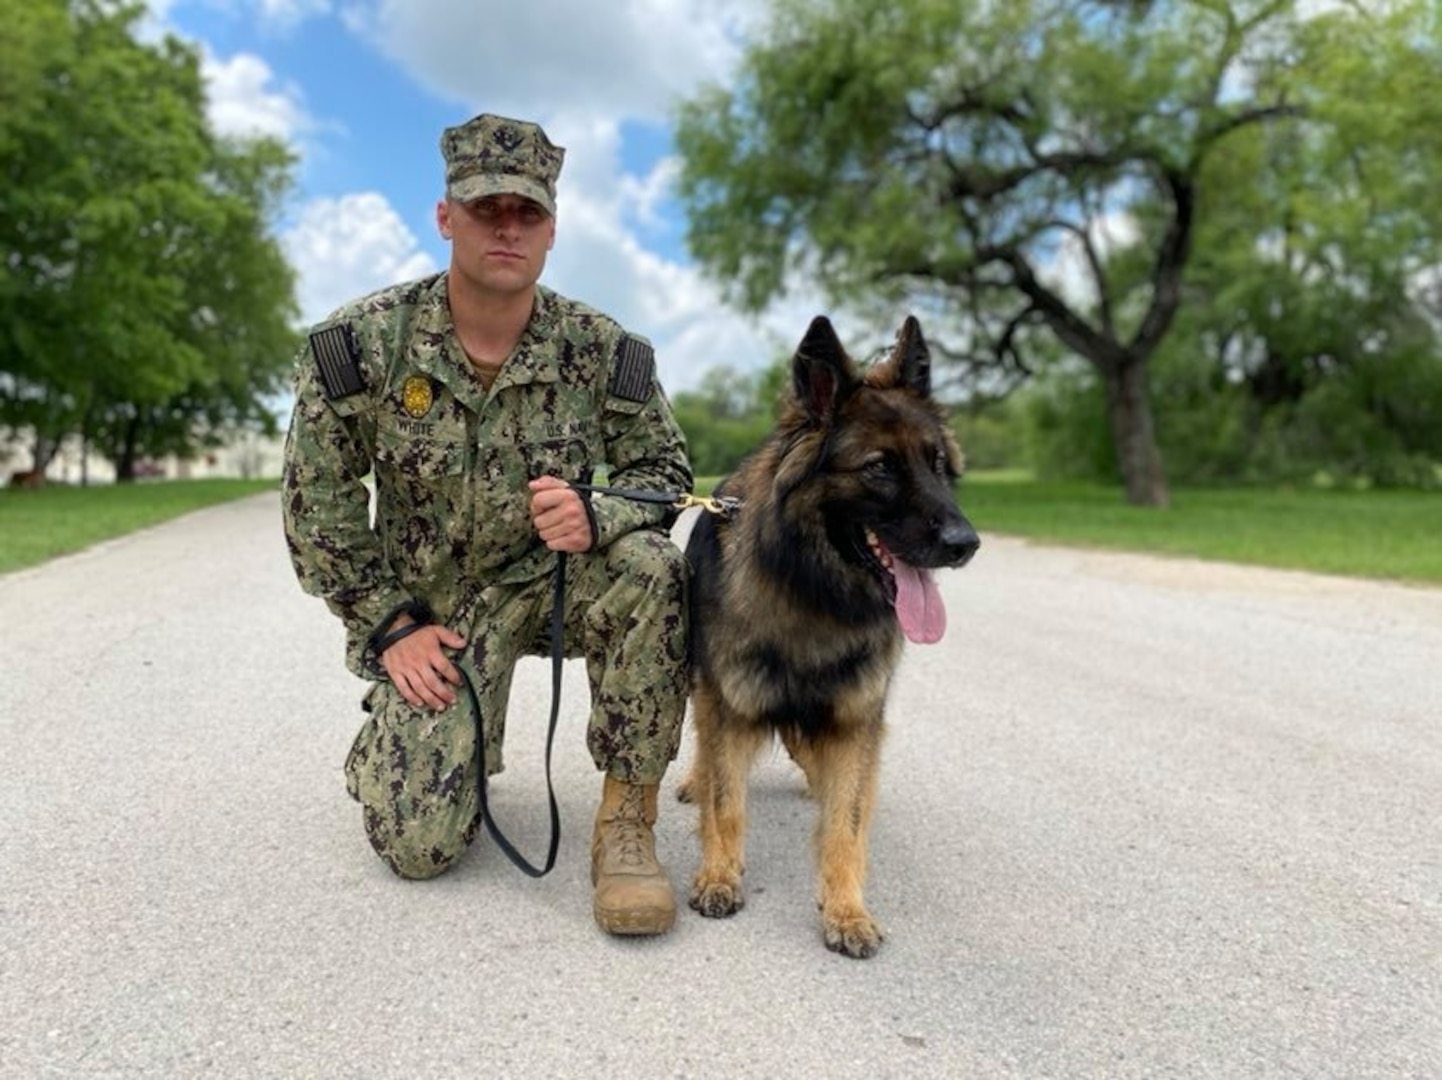 A Military Working Dog handler who trains students from the Navy poses for a photo following participation in a K-9 demonstration for the Fair Oaks, Texas, Rotary Club June 3, 2020, at Joint Base San Antonio-Lackland.